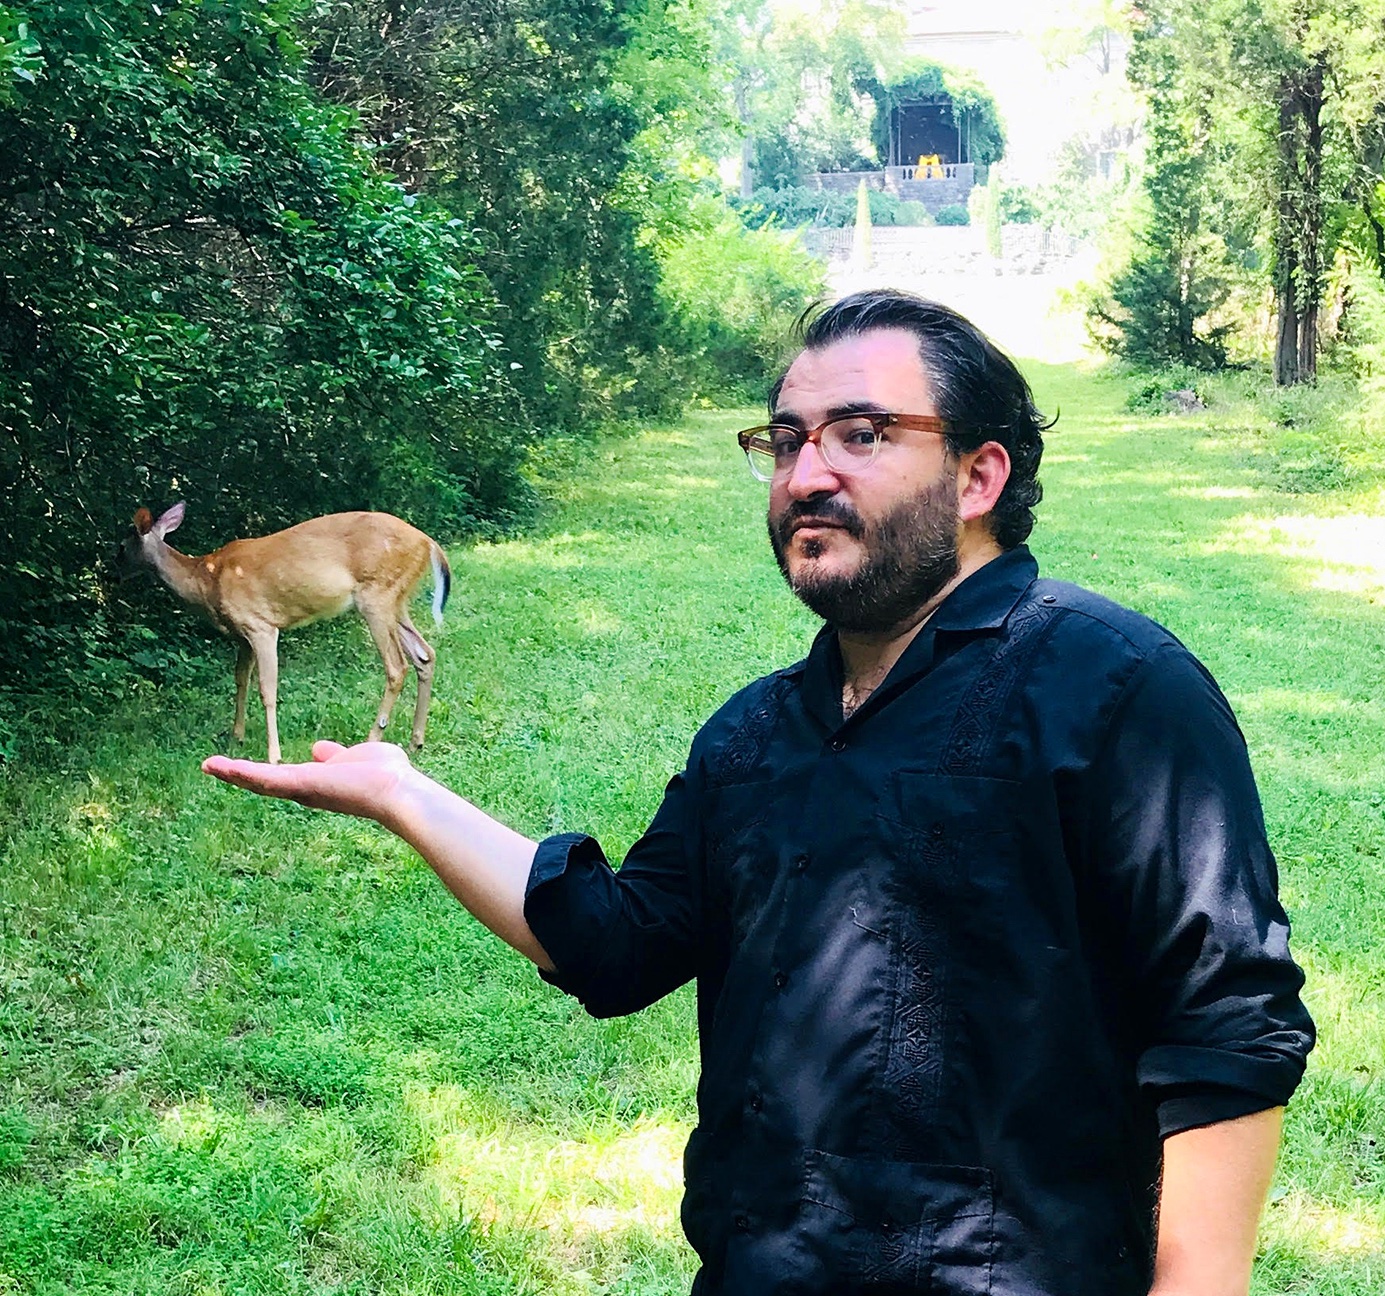 A photo of David foregrounding a deer with his palm out appearing to be holding a the deer.